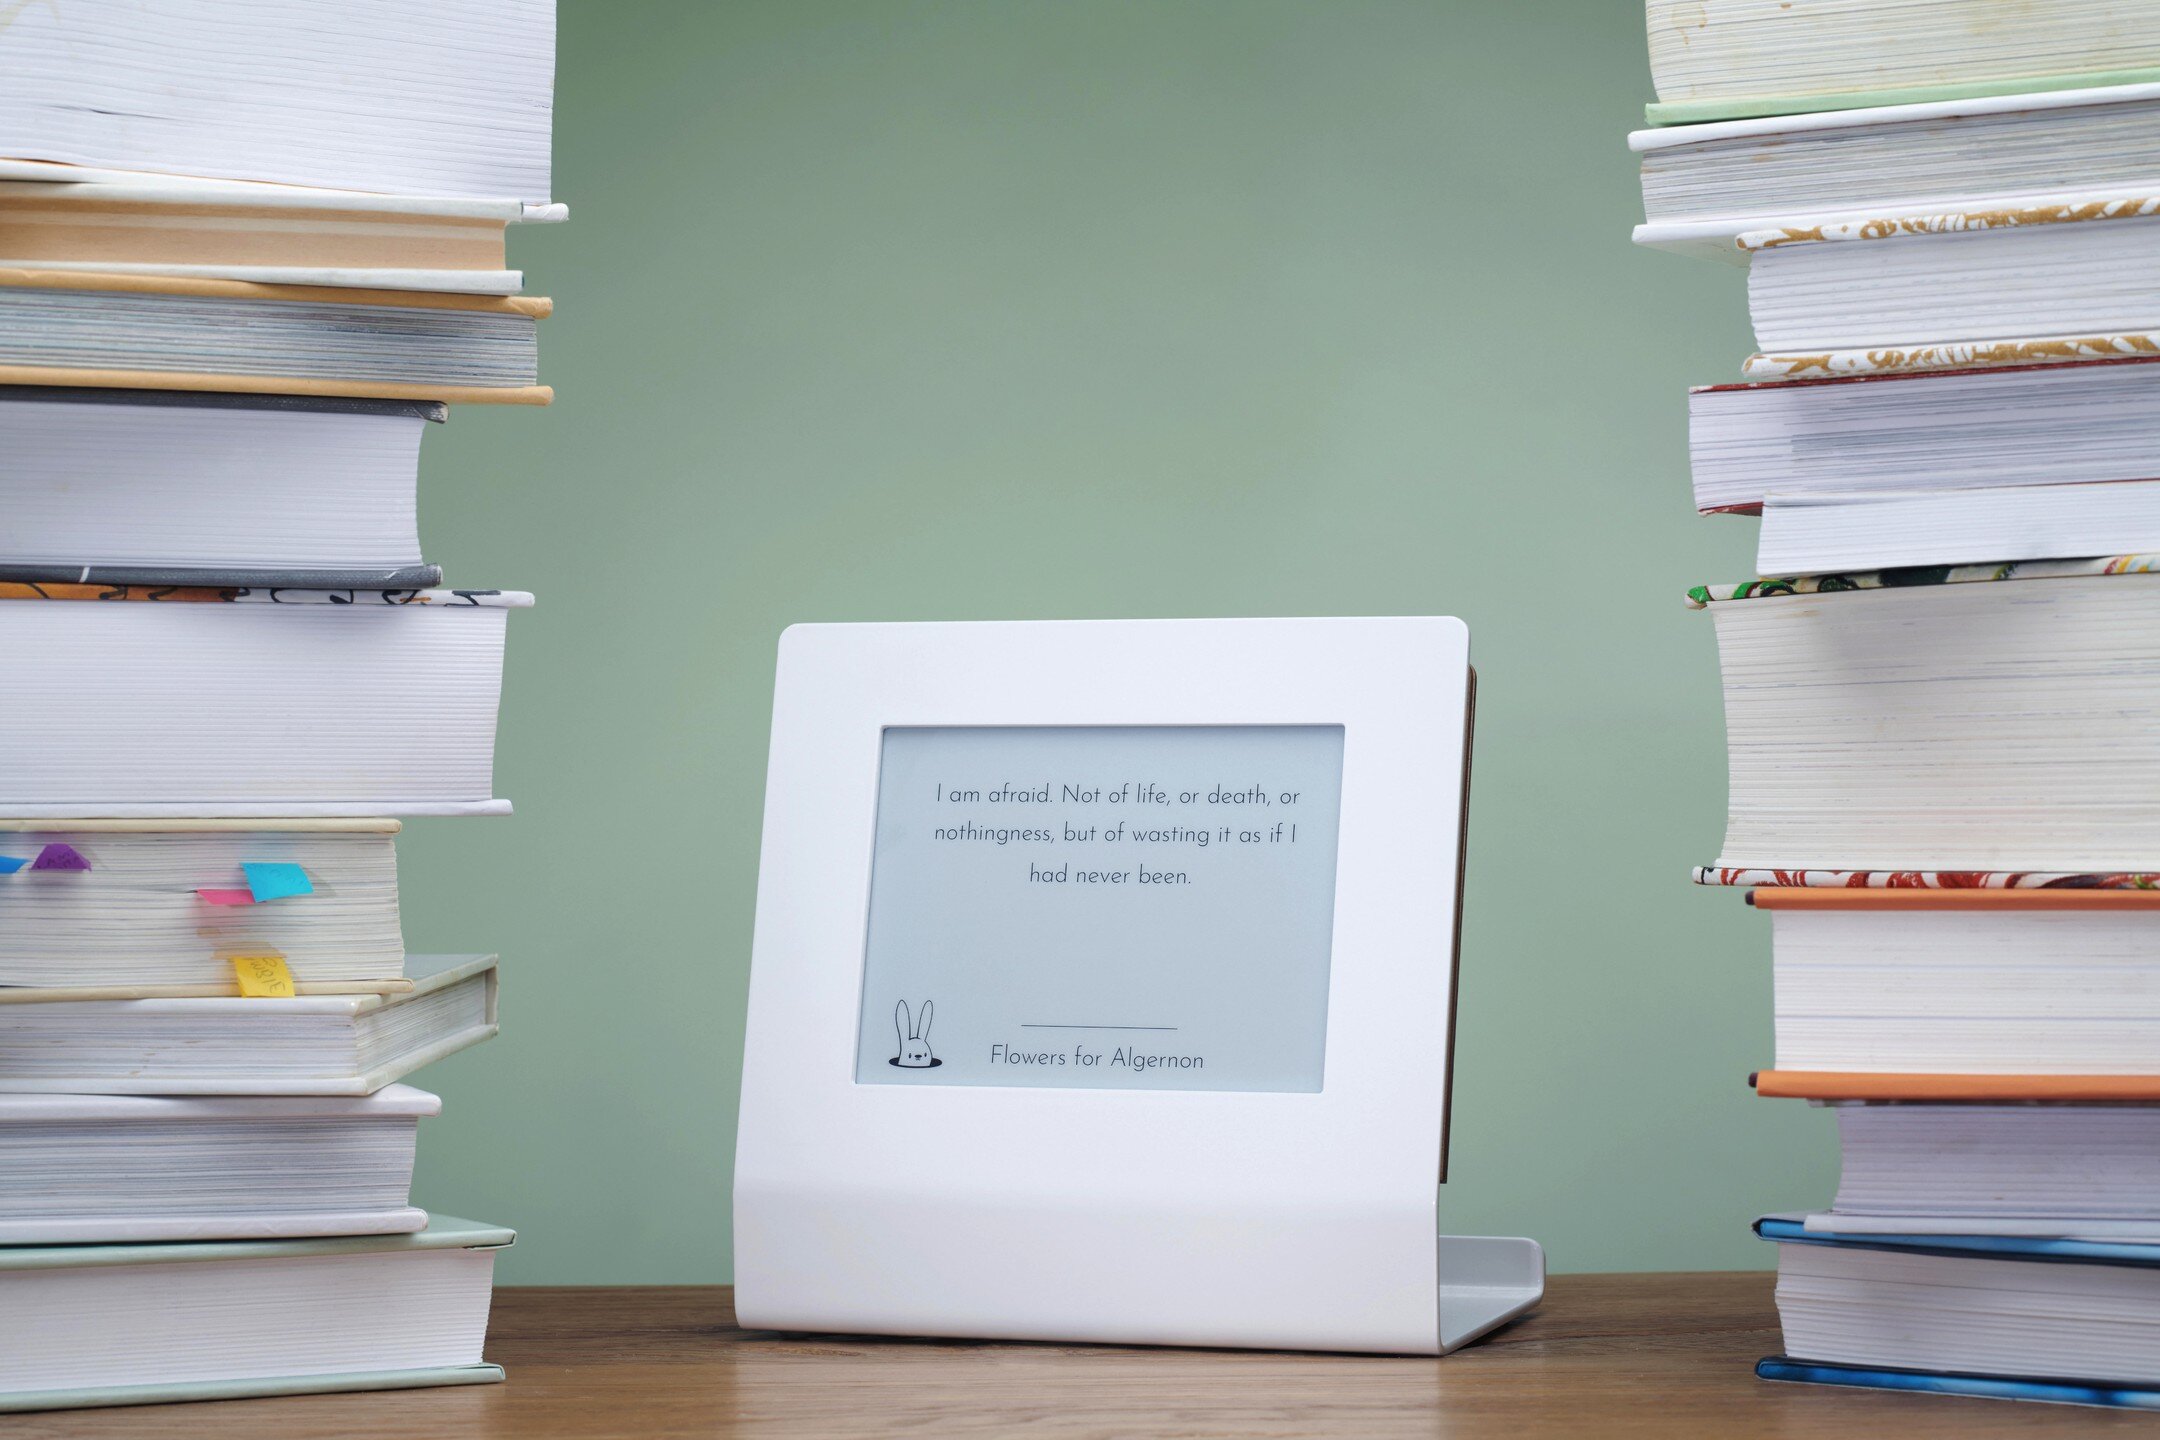 A display that can read your highlights from your kindle (or goodreads book list) and display them so that your friends can marvel at what a high-brow-boffin you are.